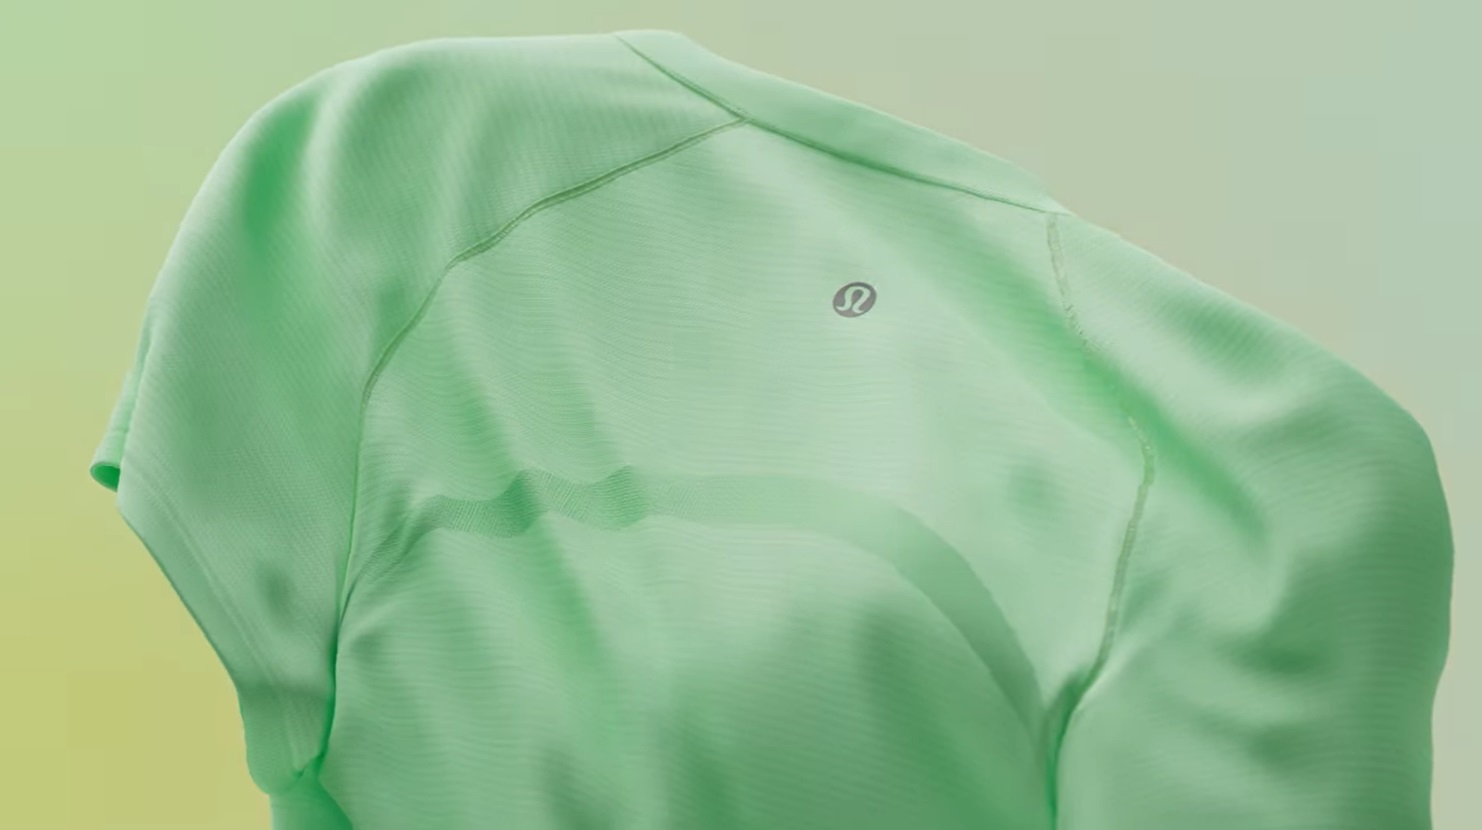 Lululemon Launches its First Products with Nylon From Plants Instead of Fossil Fuels